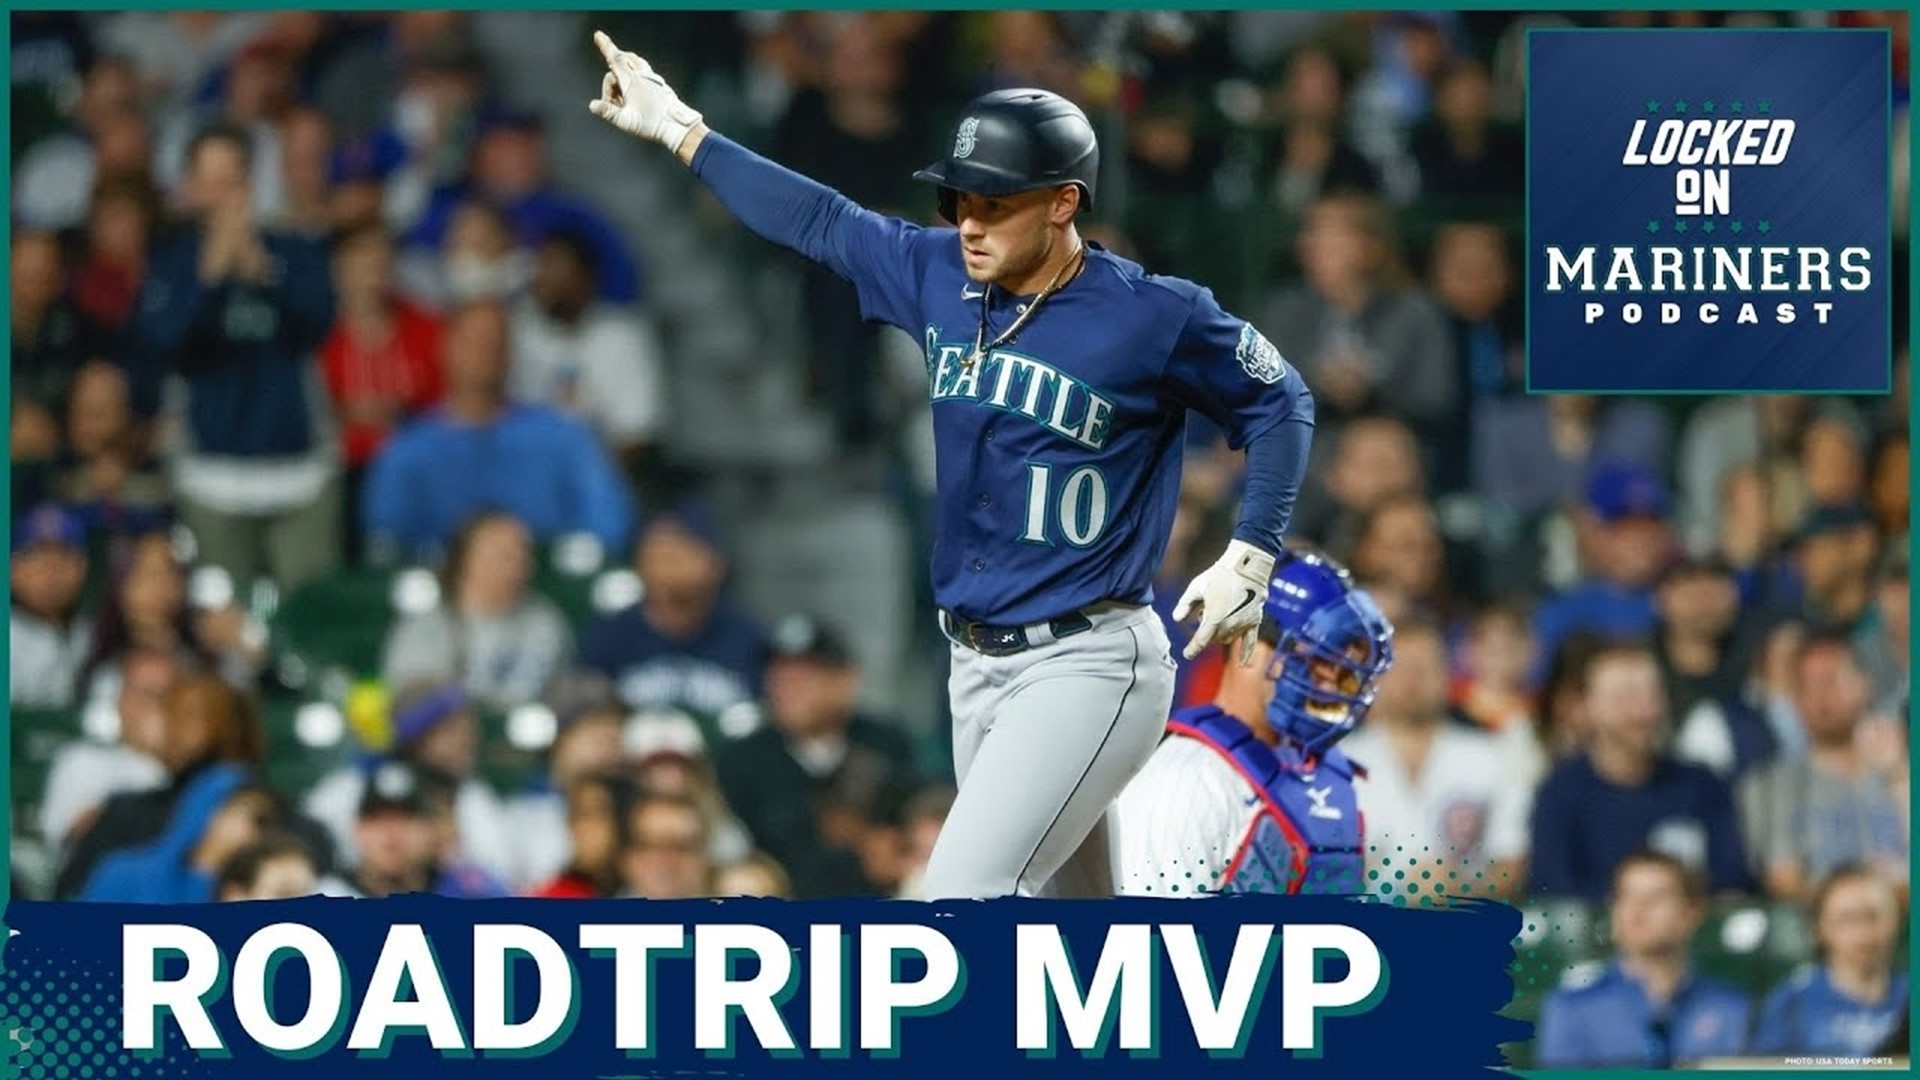 The Mariners are back home after a 3-3 road trip. Colby and Ty take a look back at the positives and the negatives of Seattle's tour of Cleveland and Chicago.